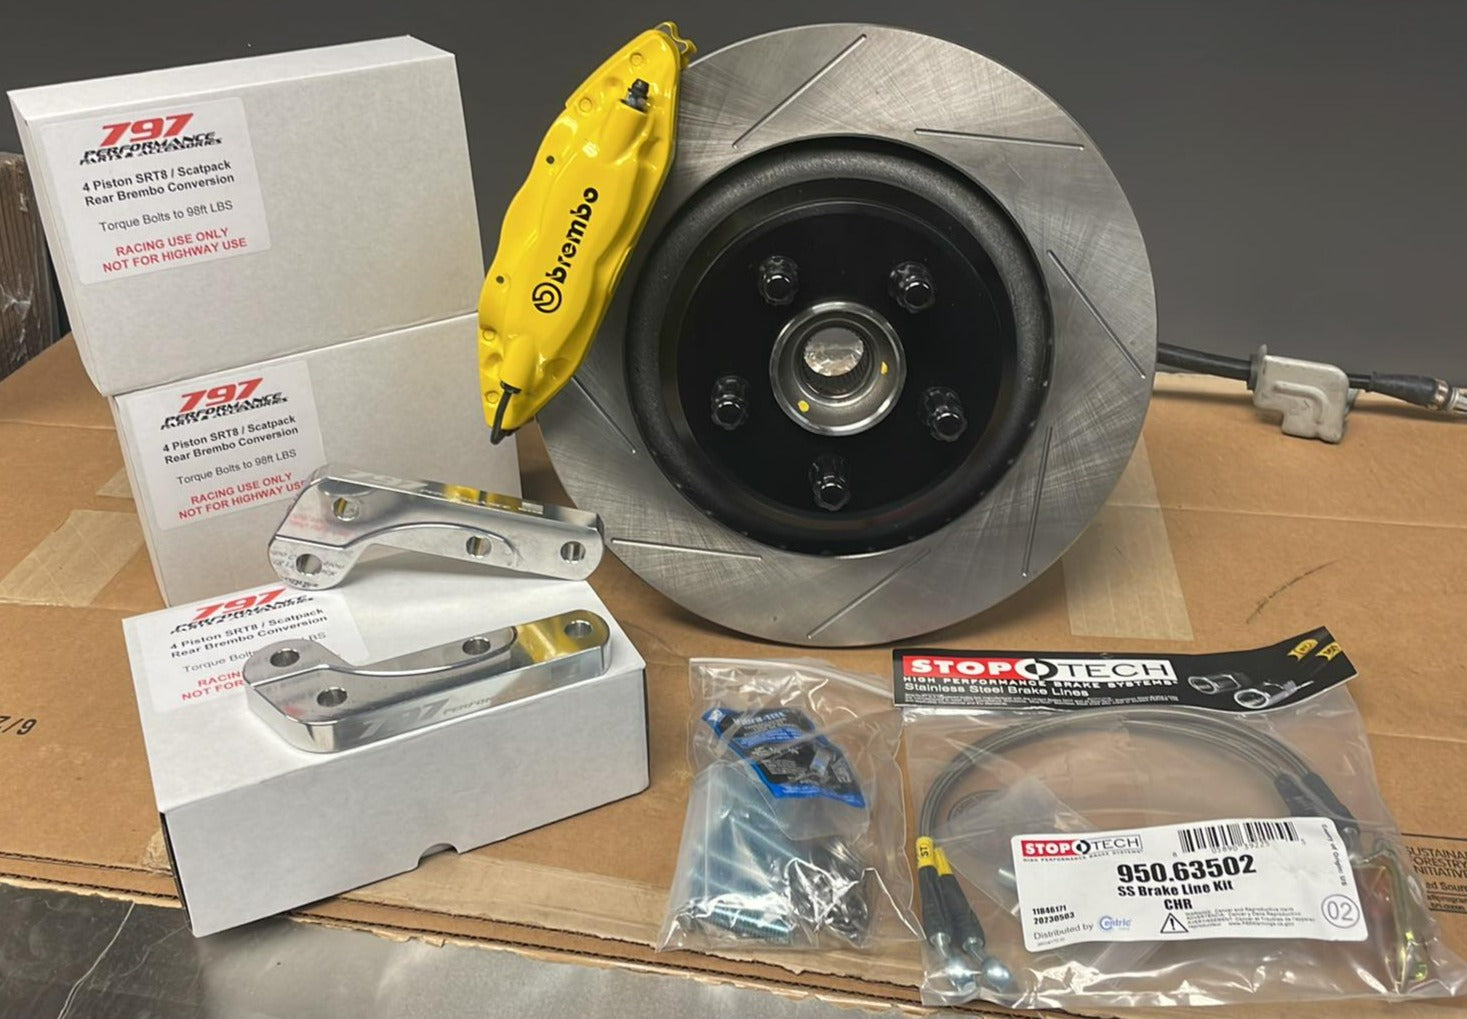 797 Performance- Near Bolt-on Charger/Challenger/300/Magnum Rear Brembo Conversion Kit